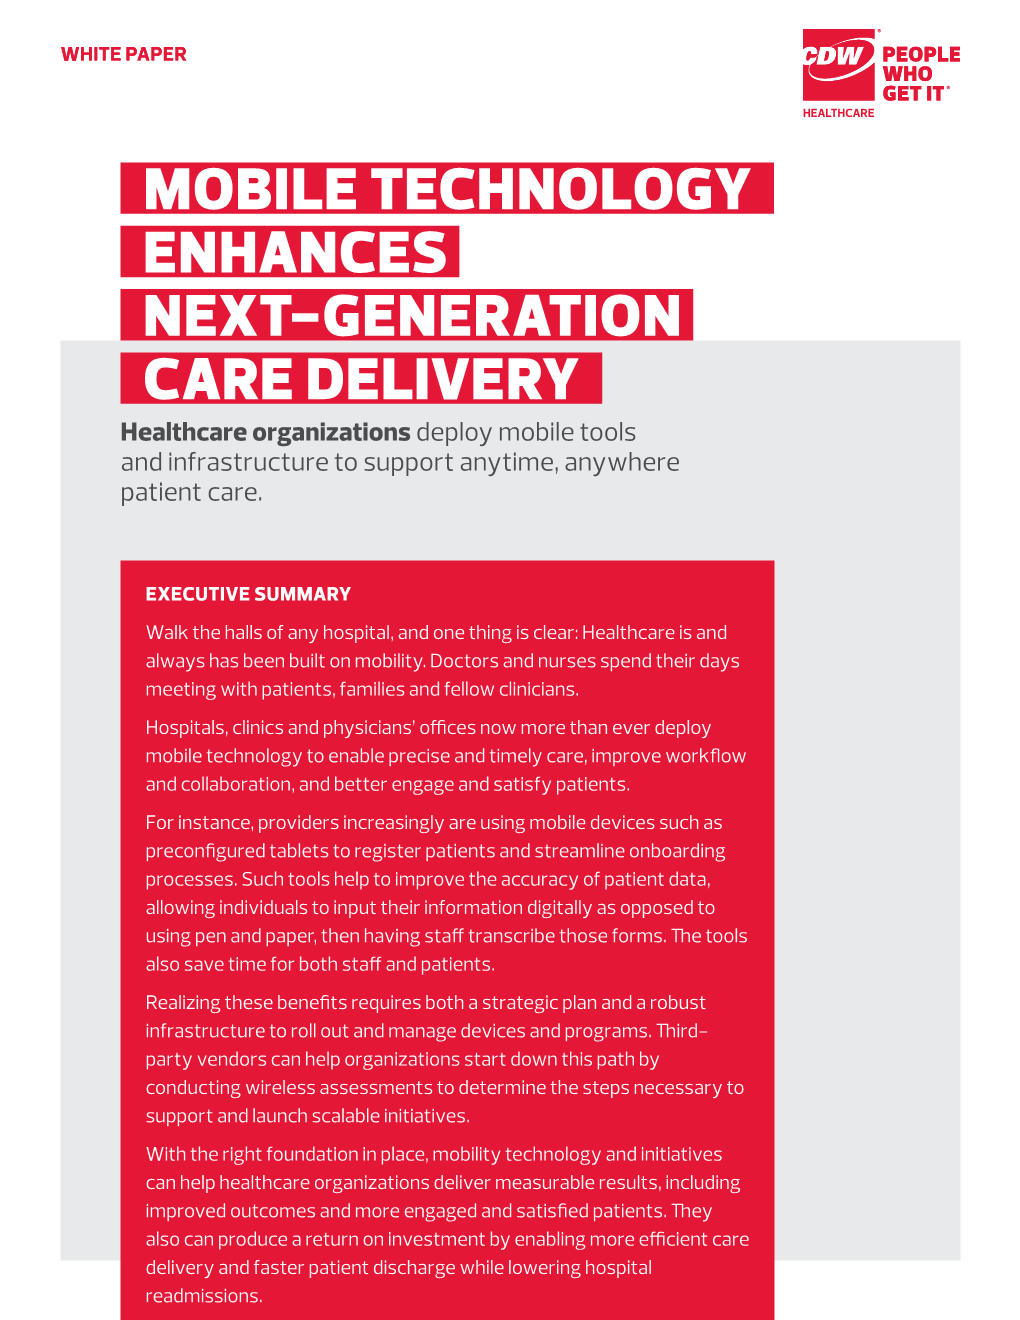 MOBILE TECHNOLOGY ENHANCES NEXT-GENERATION CARE DELIVERY Healthcare Organizations Deploy Mobile Tools and Infrastructure to Support Anytime, Anywhere Patient Care